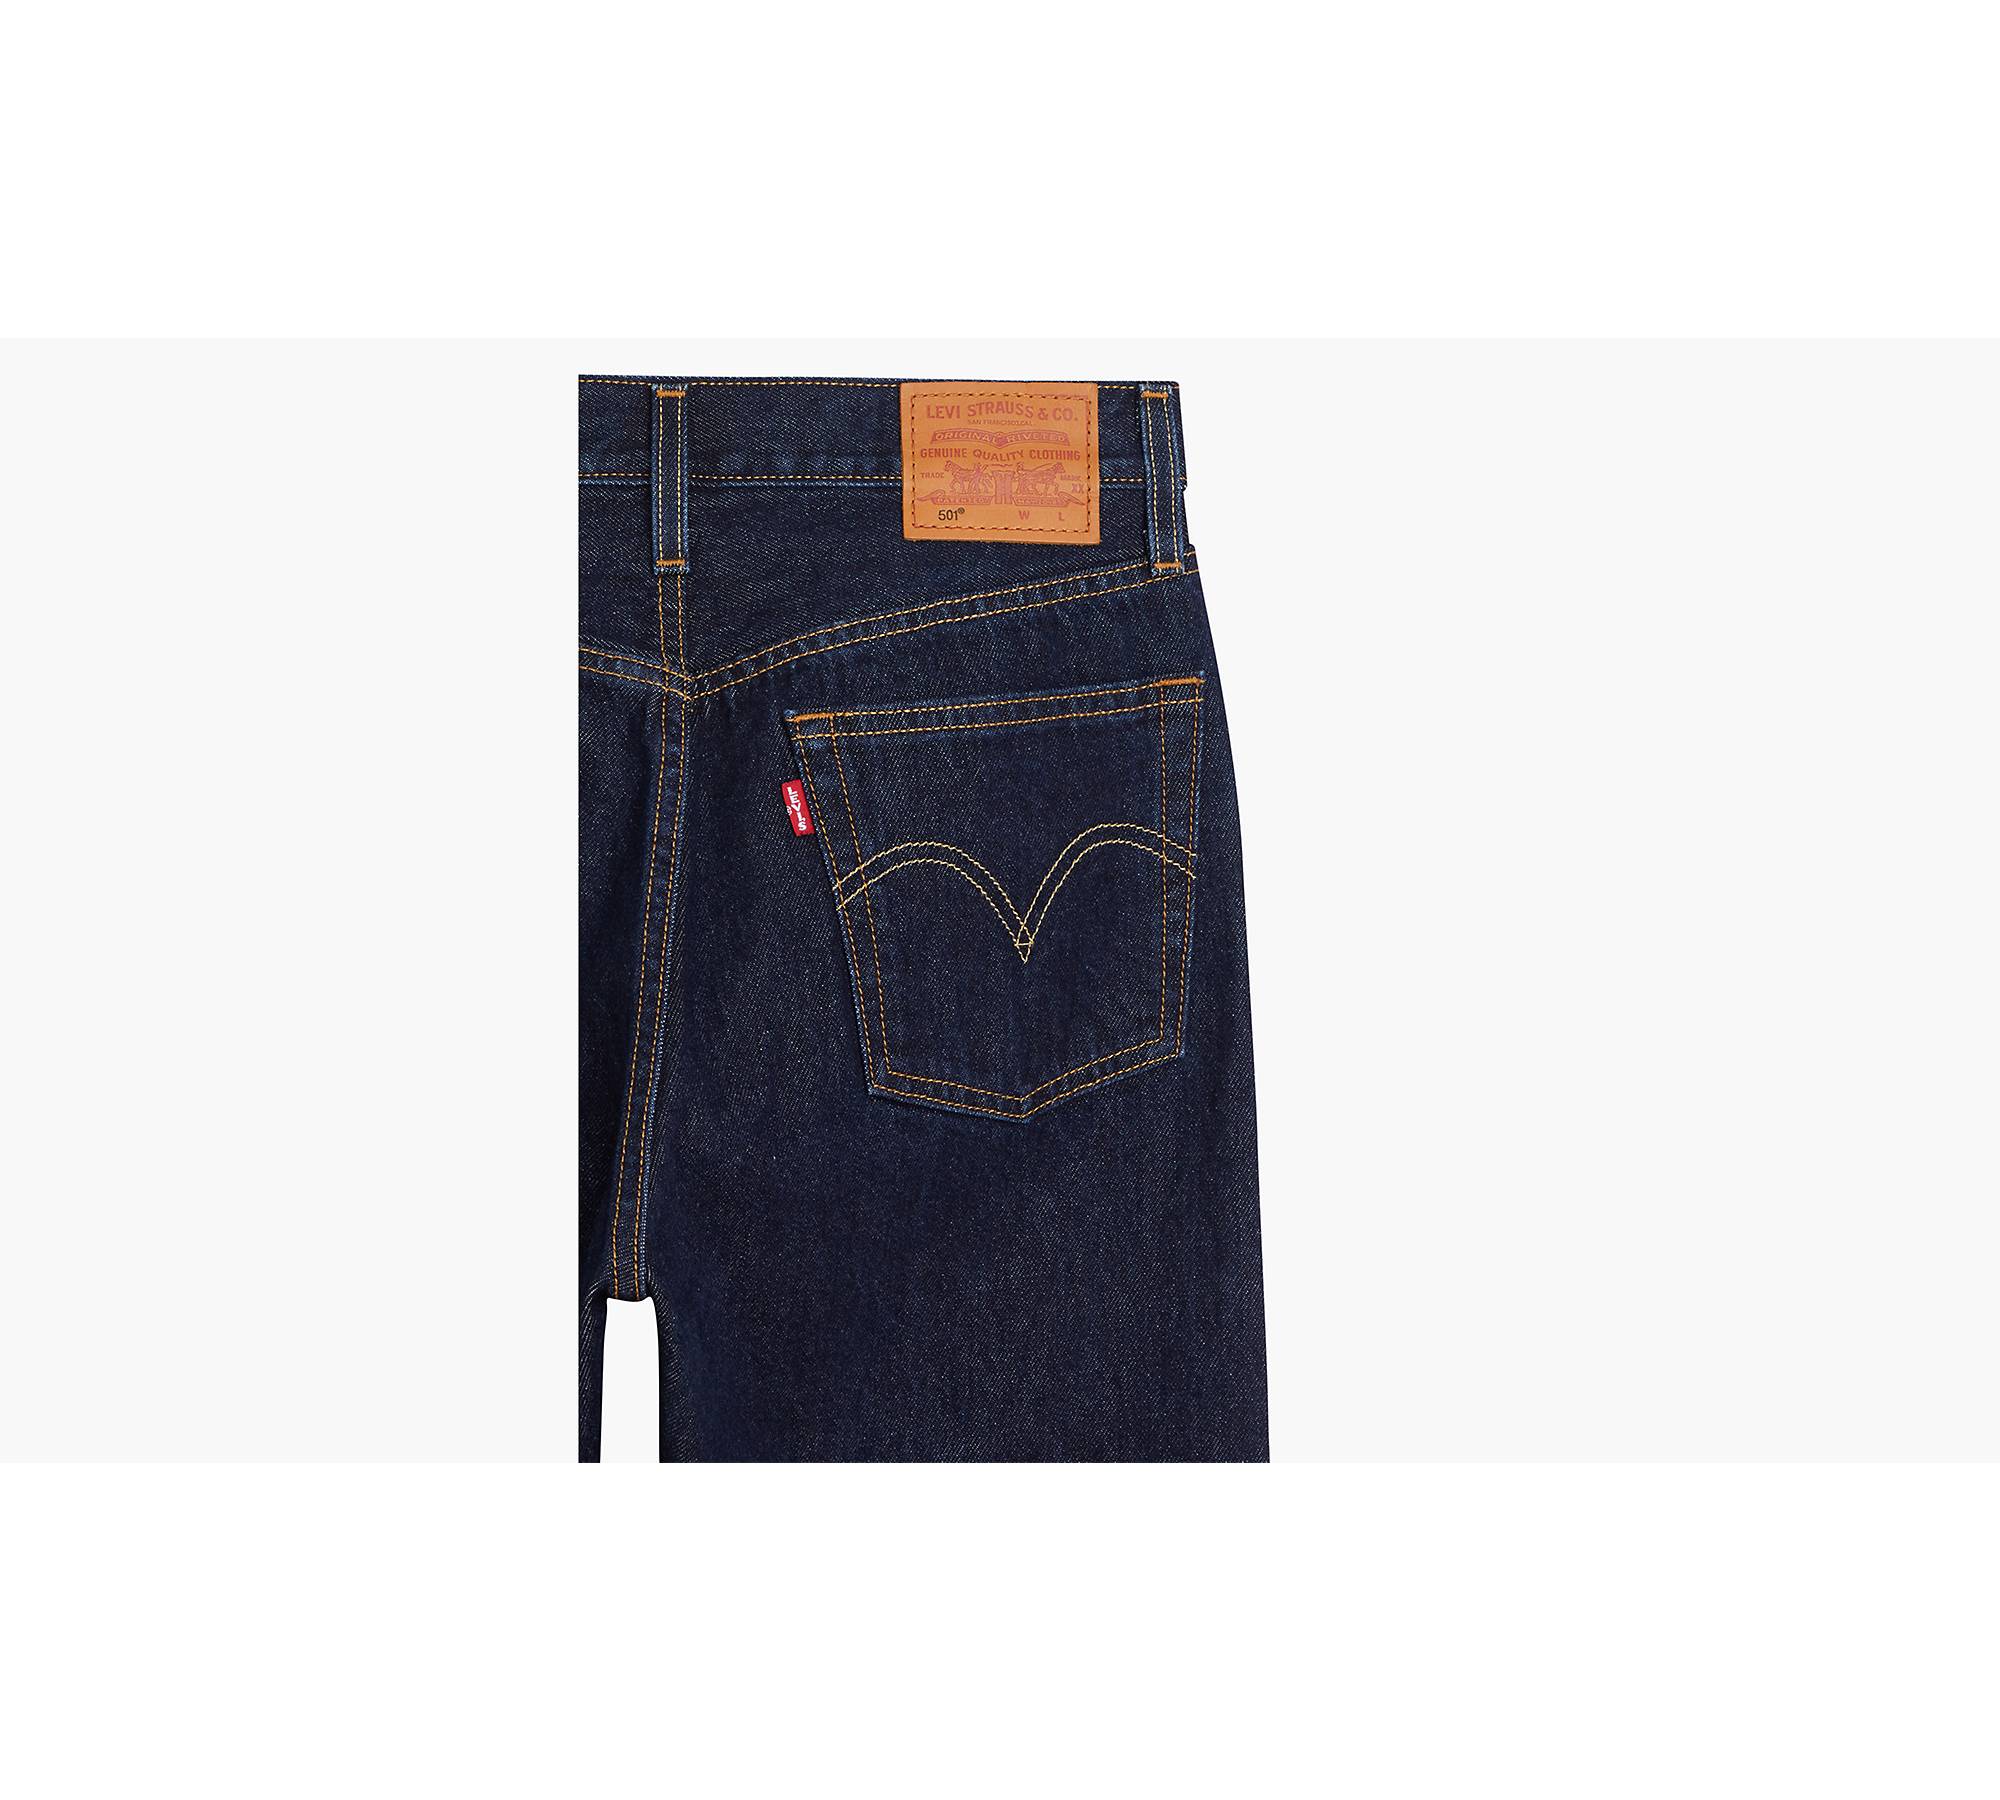 Jeans Mujer Levi's 501 Original Fit 12501-0395